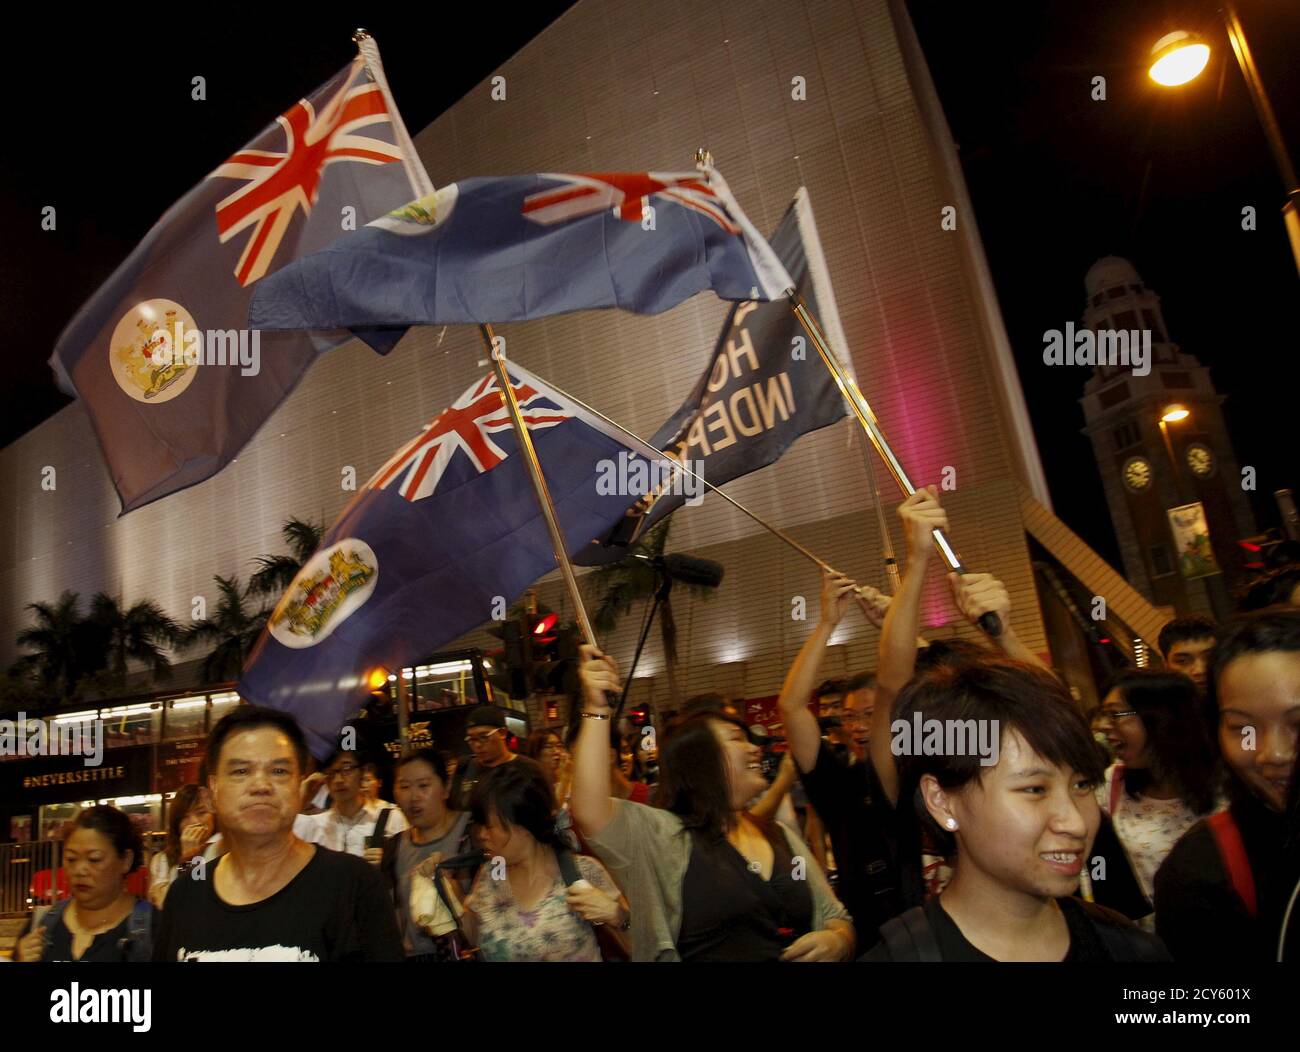 Protesters carrying former colonial Hong Kong flags take to the streets after a rally to mark the 1989 Tiananmen crackdown, at Tsim Sha Tsui district in Hong Kong, China June 4, 2015. Tens of thousands attended a candlelight vigil in Hong Kong on Thursday to mark China's 1989 crackdown on pro-democracy demonstrators in Beijing, an anniversary given added poignancy by protests that gripped the Chinese-run city last year.  REUTERS/Liau Chung-ren Stock Photo